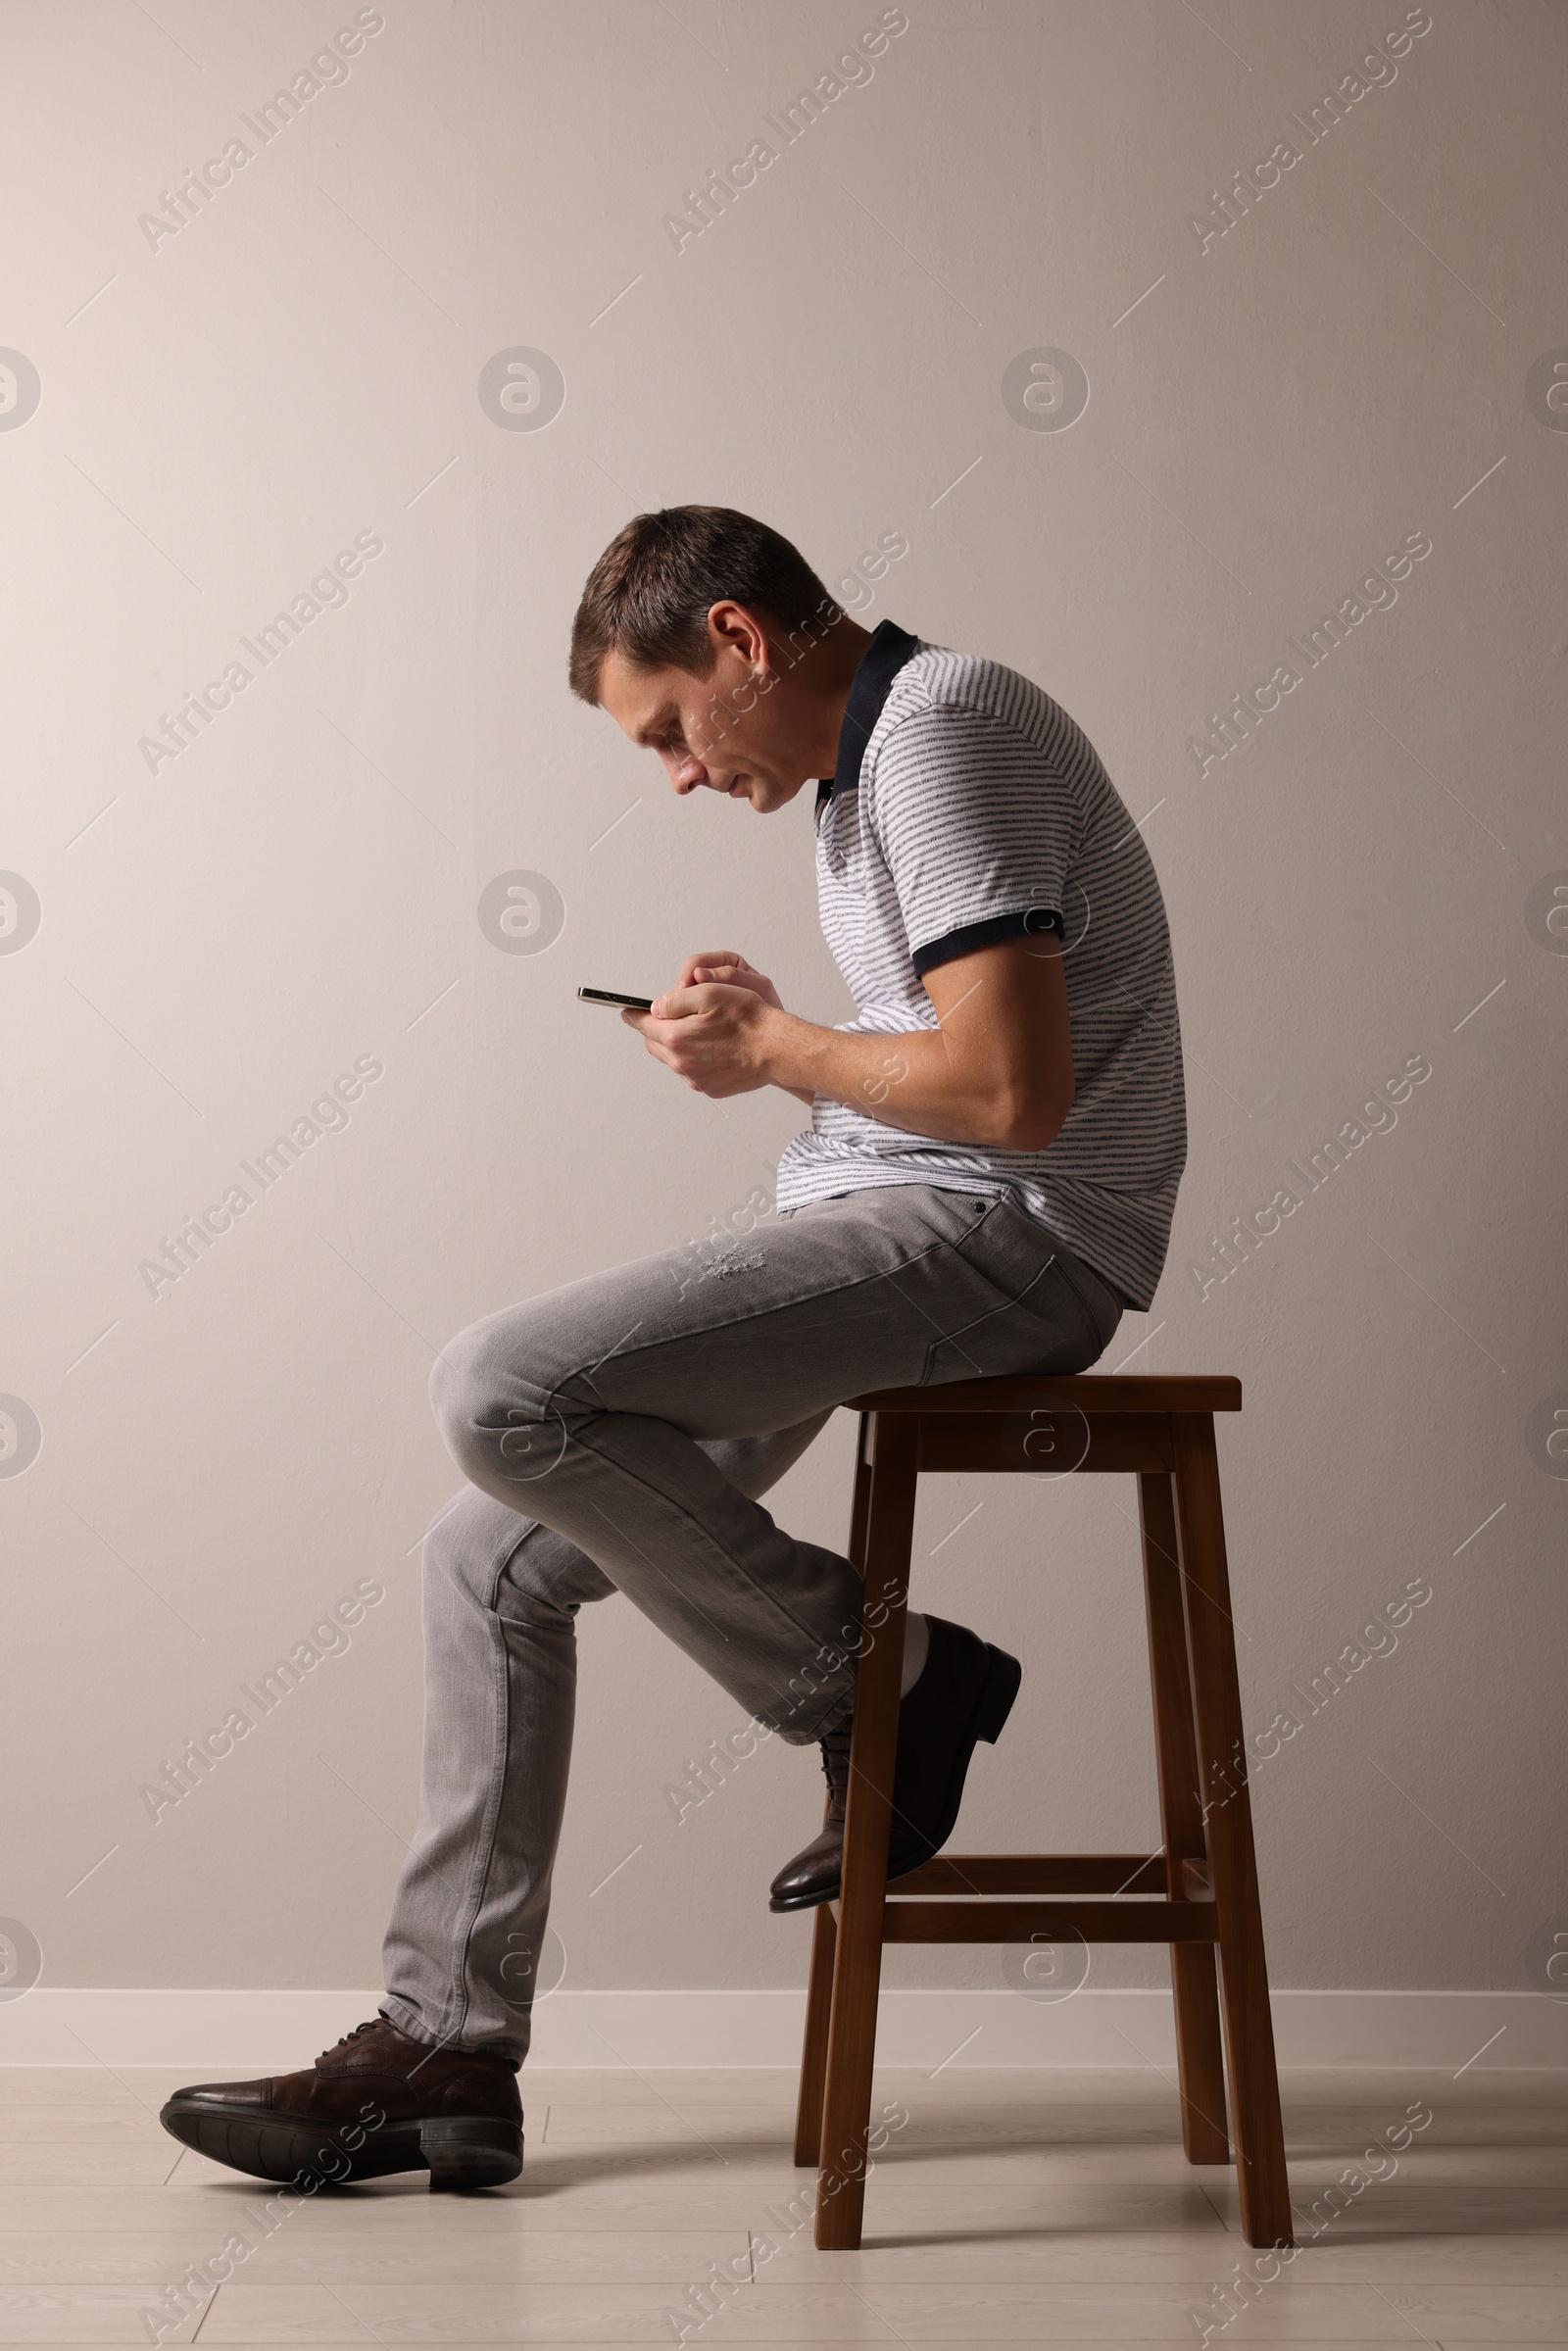 Photo of Man with bad posture using smartphone while sitting on stool against grey background